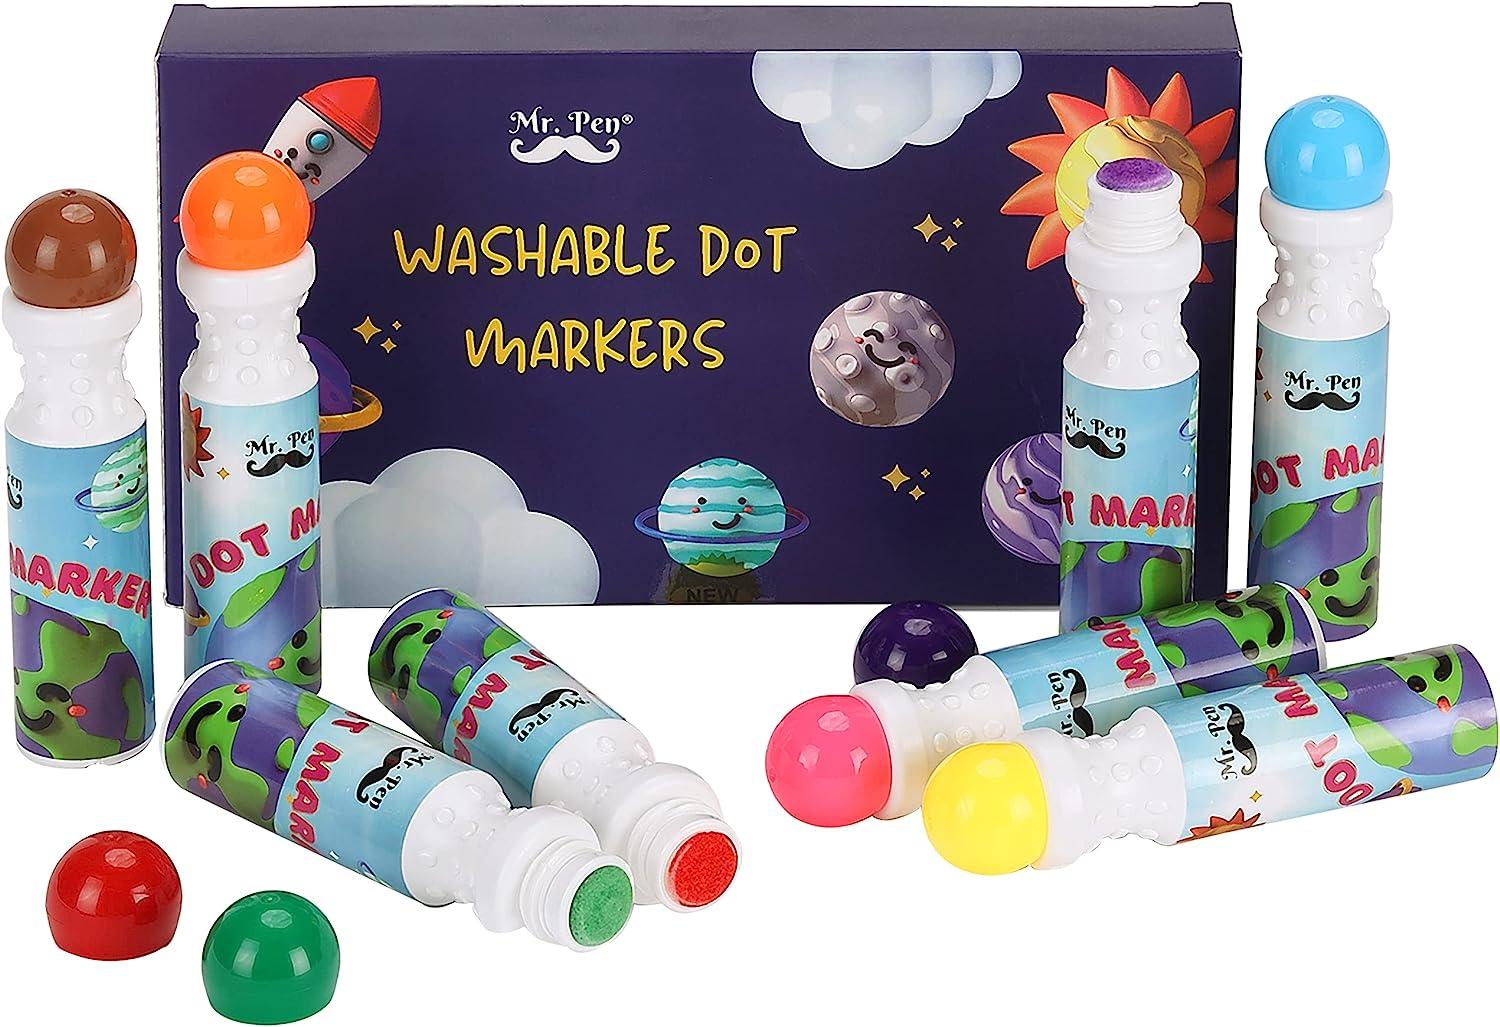 8 Colors Dot Markers Paint Dauber Bingo Dabbers Washable Non-toxic  Water-based Dot Markers For Kids Painting Art Craft Supplies - Fabric  Decorating - AliExpress